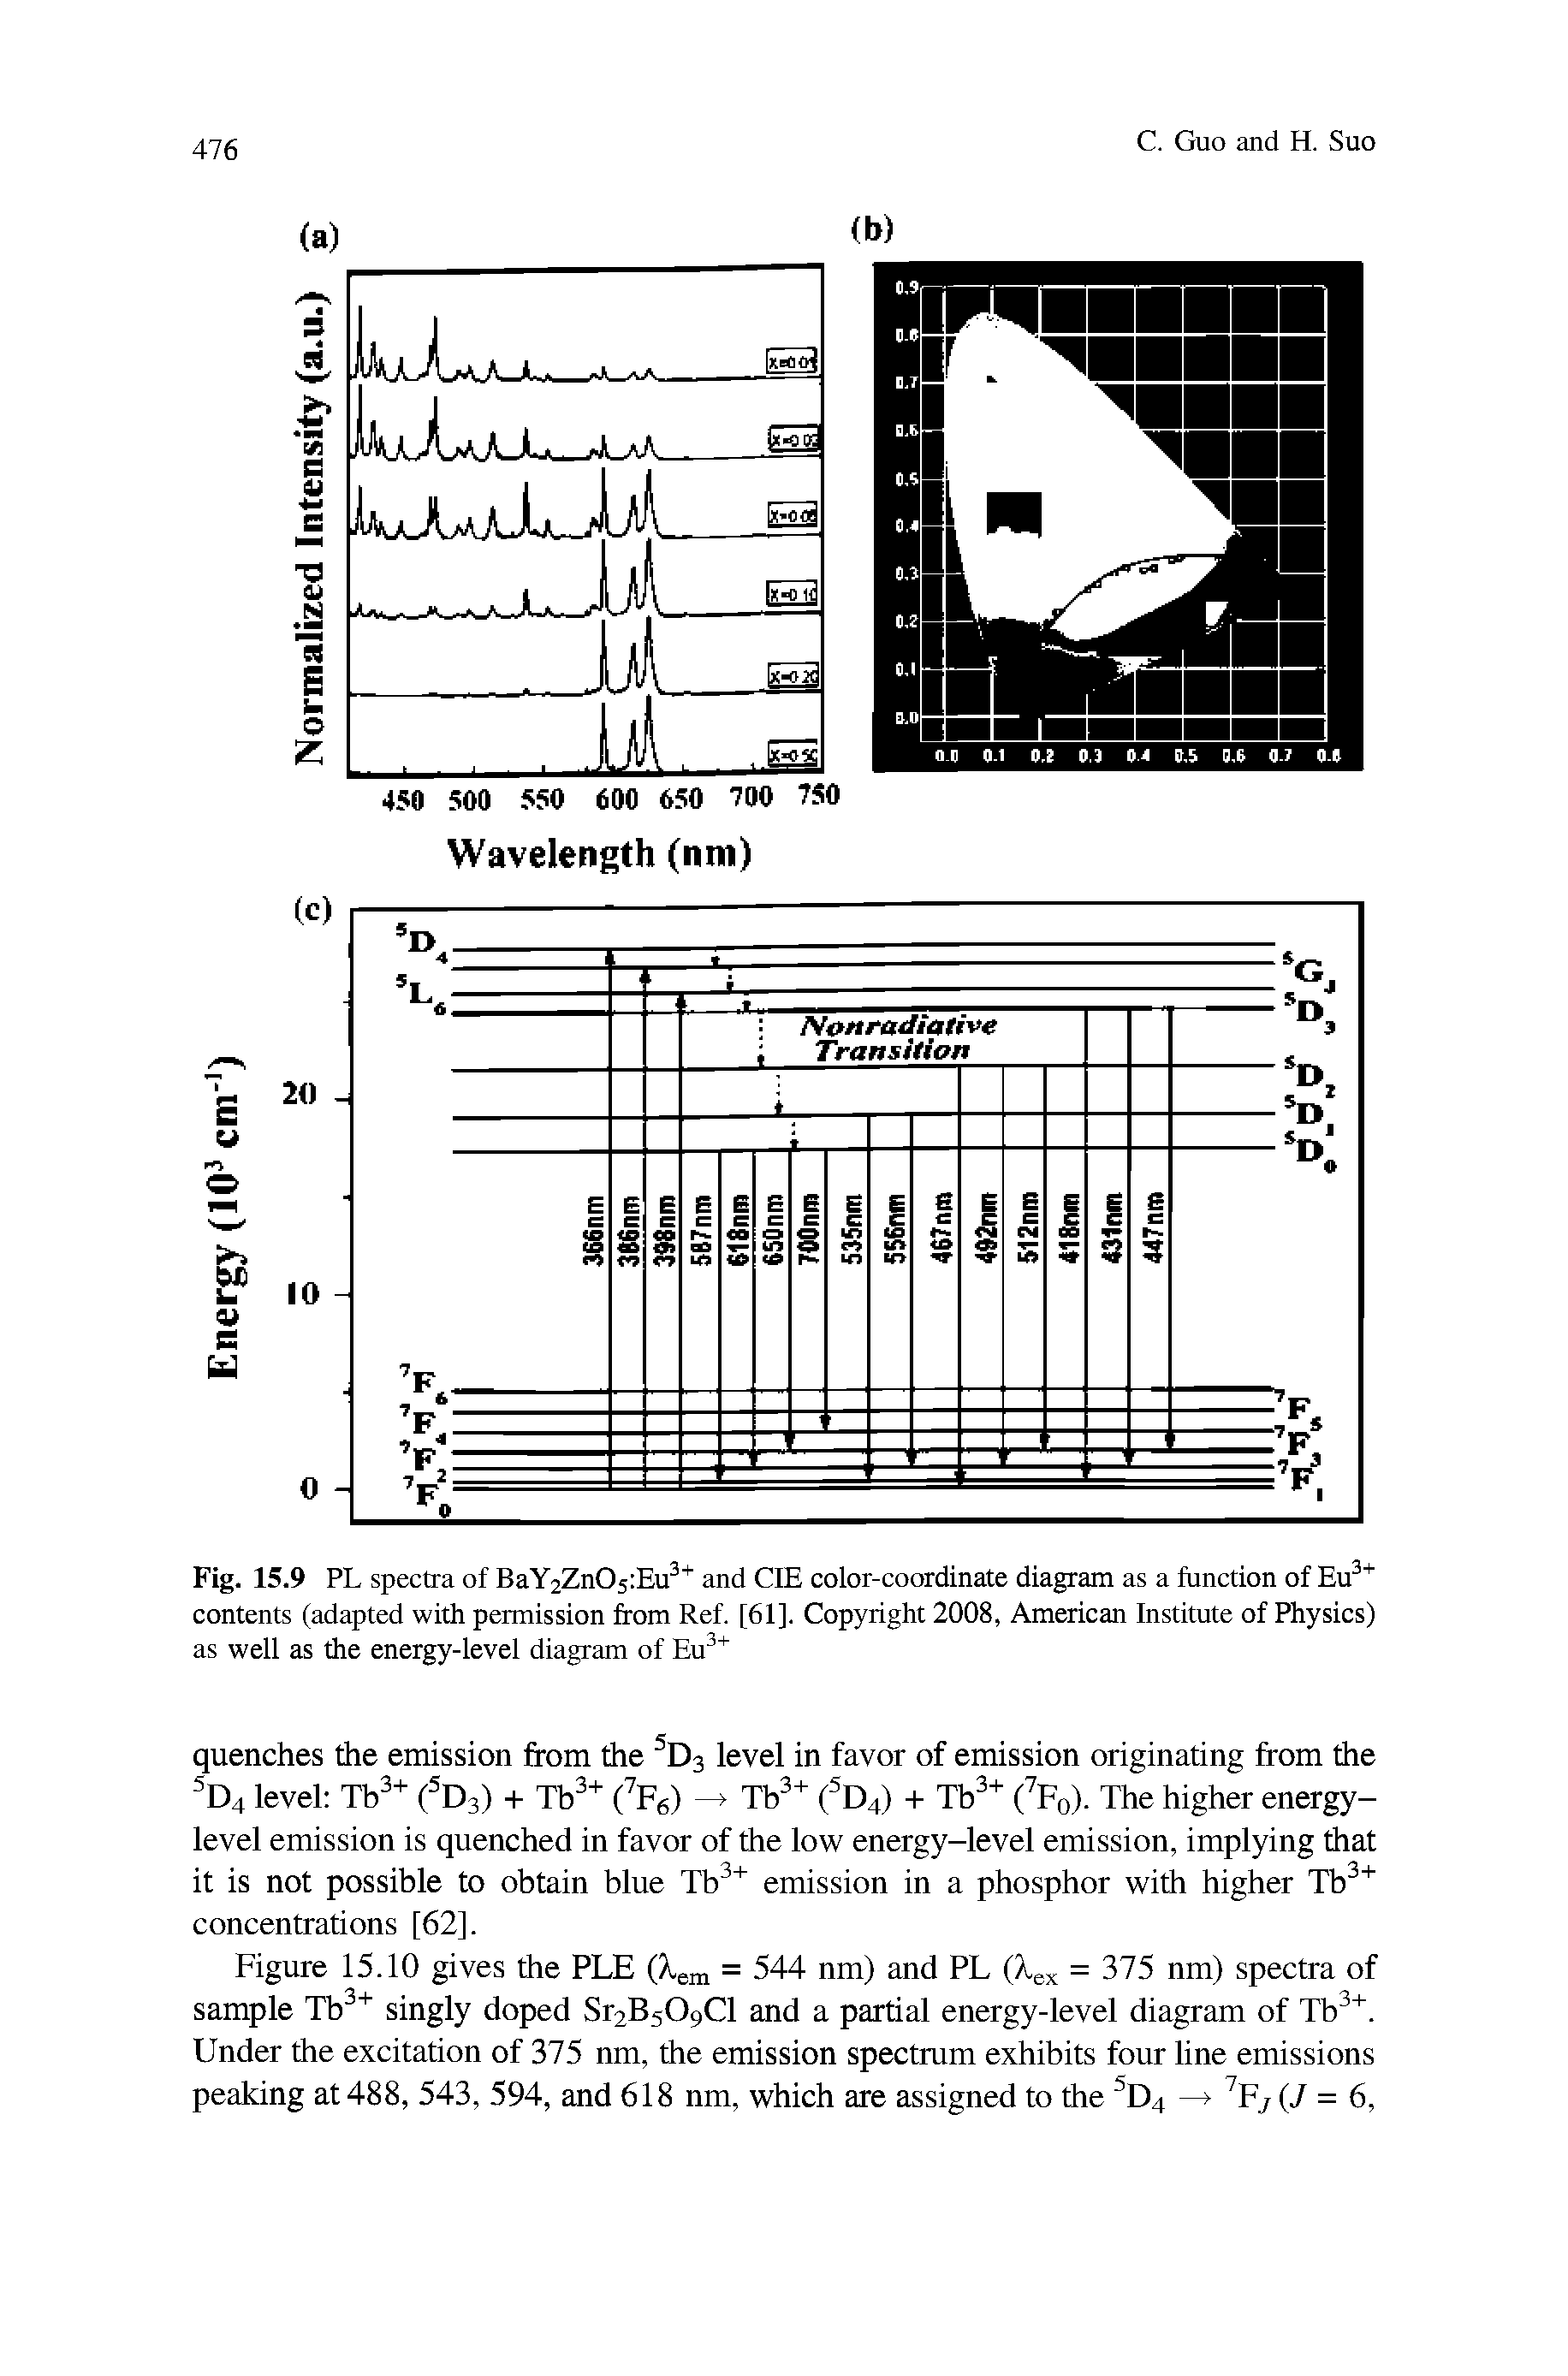 Fig. 15.9 PL spectra of BaY2Zn05 Eu and CIE color-coordinate diagram as a function of Eu contents (adapted with permission from Ref. [61]. Copyright 2008, American Institute of Physics) as well as the energy-level diagram of Eu ...